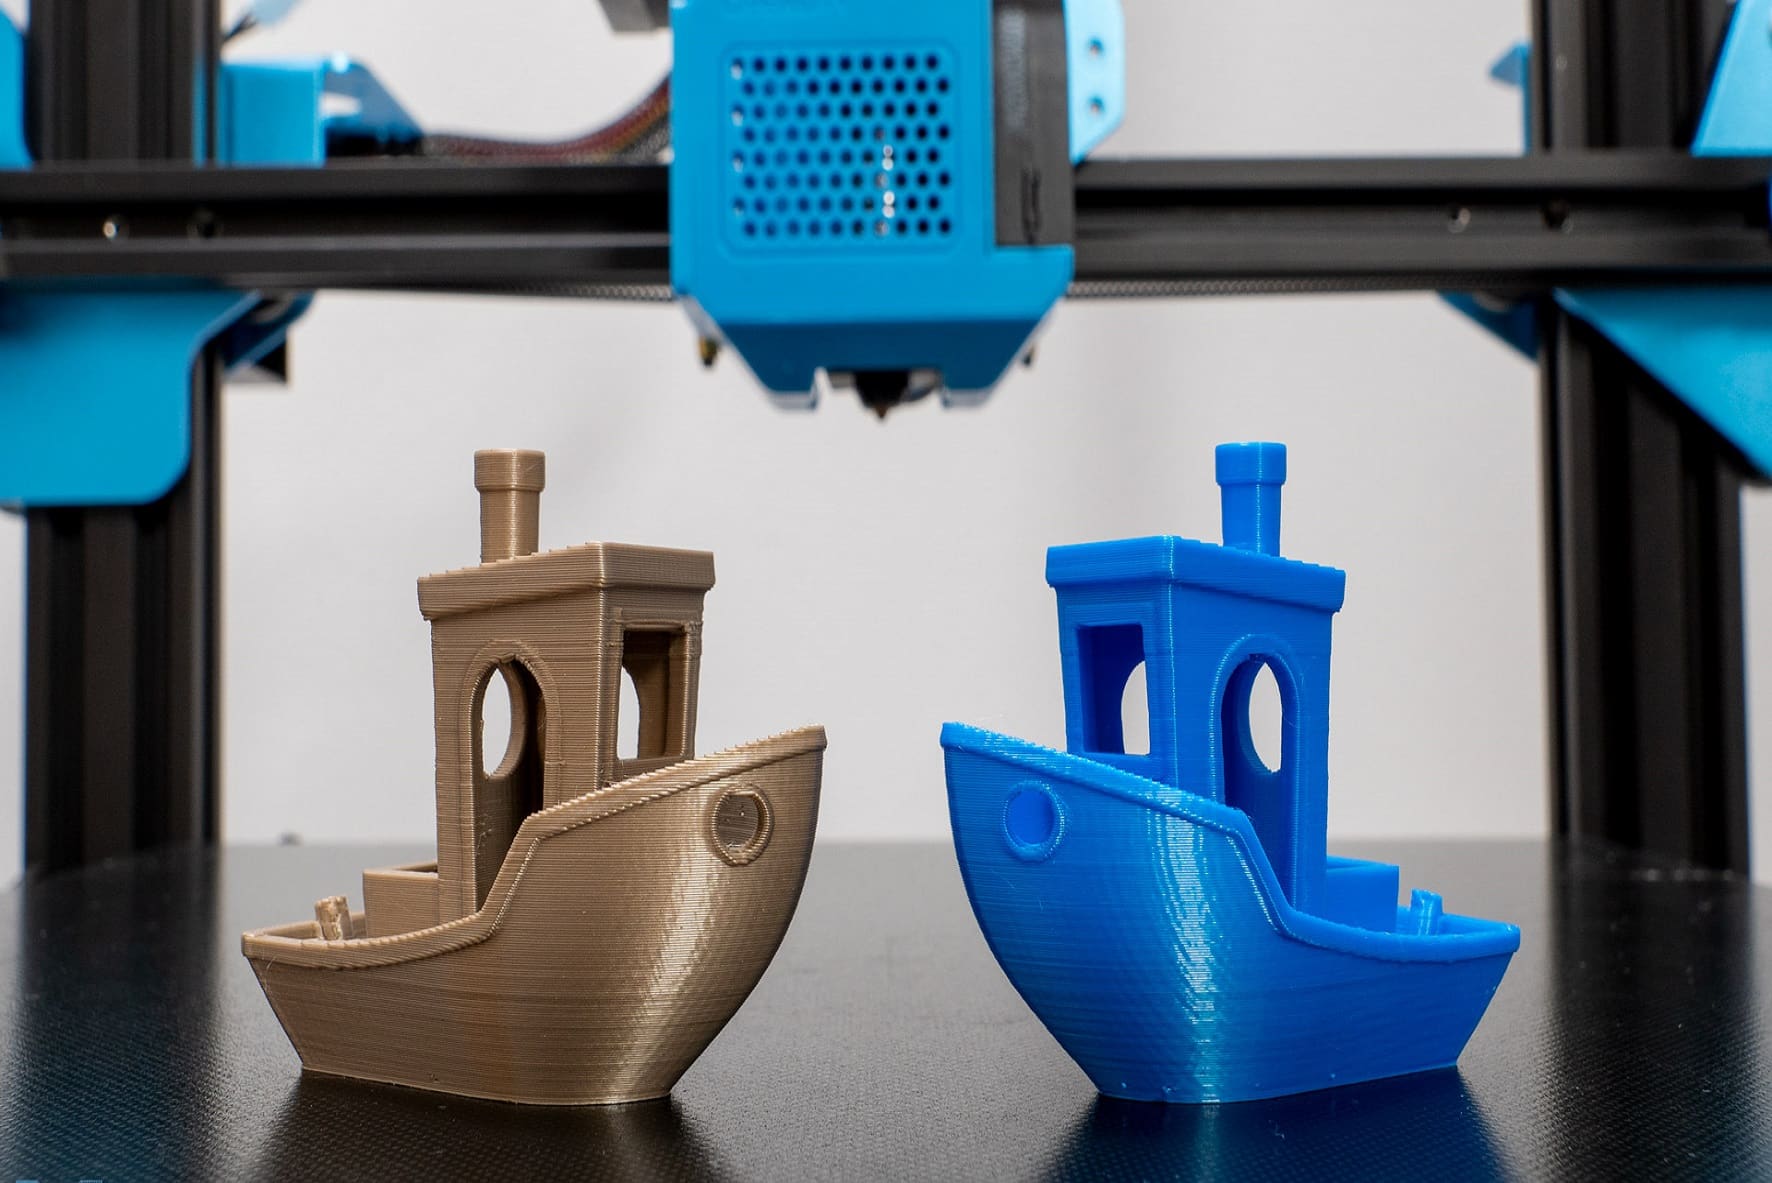 4 Reasons Why You Should Buy A Home 3D Printer